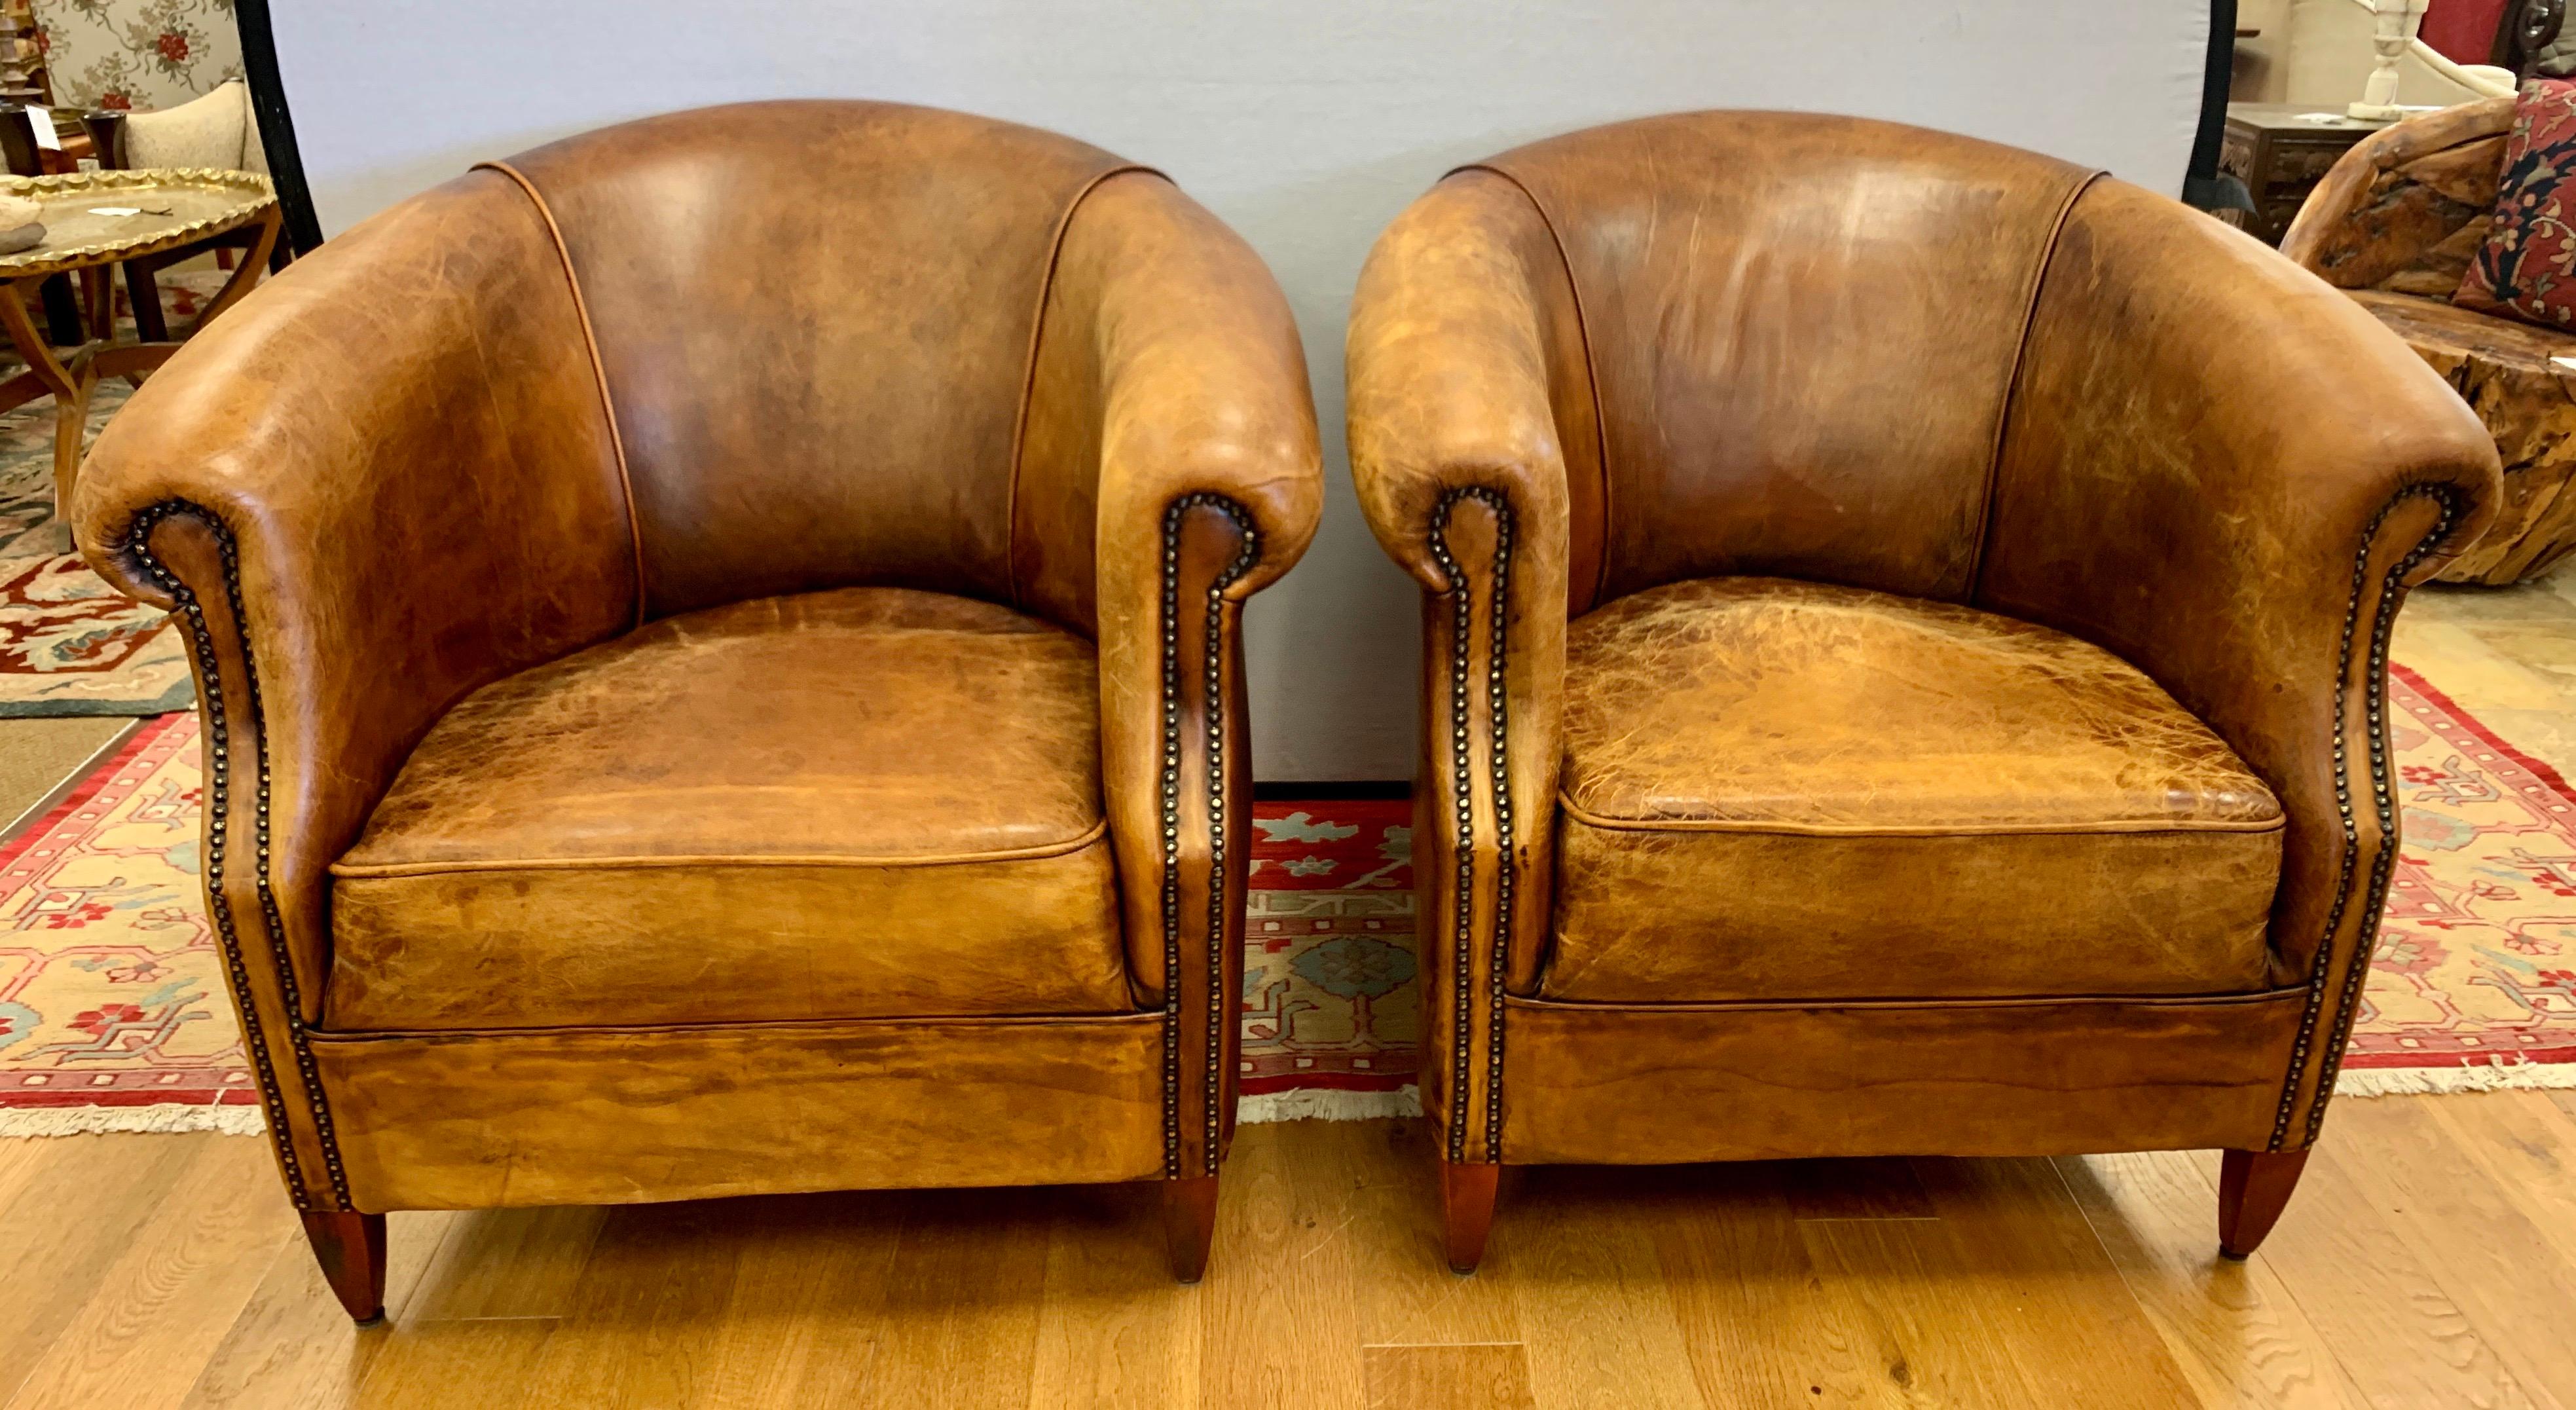 Elegant matching pair of distressed leather with nailheads chairs with coveted barrel back shape,
circa mid-20th century or earlier. The brown leather has a gorgeous patina and is distressed and
has some cracking mostly at the seat as is the plan.